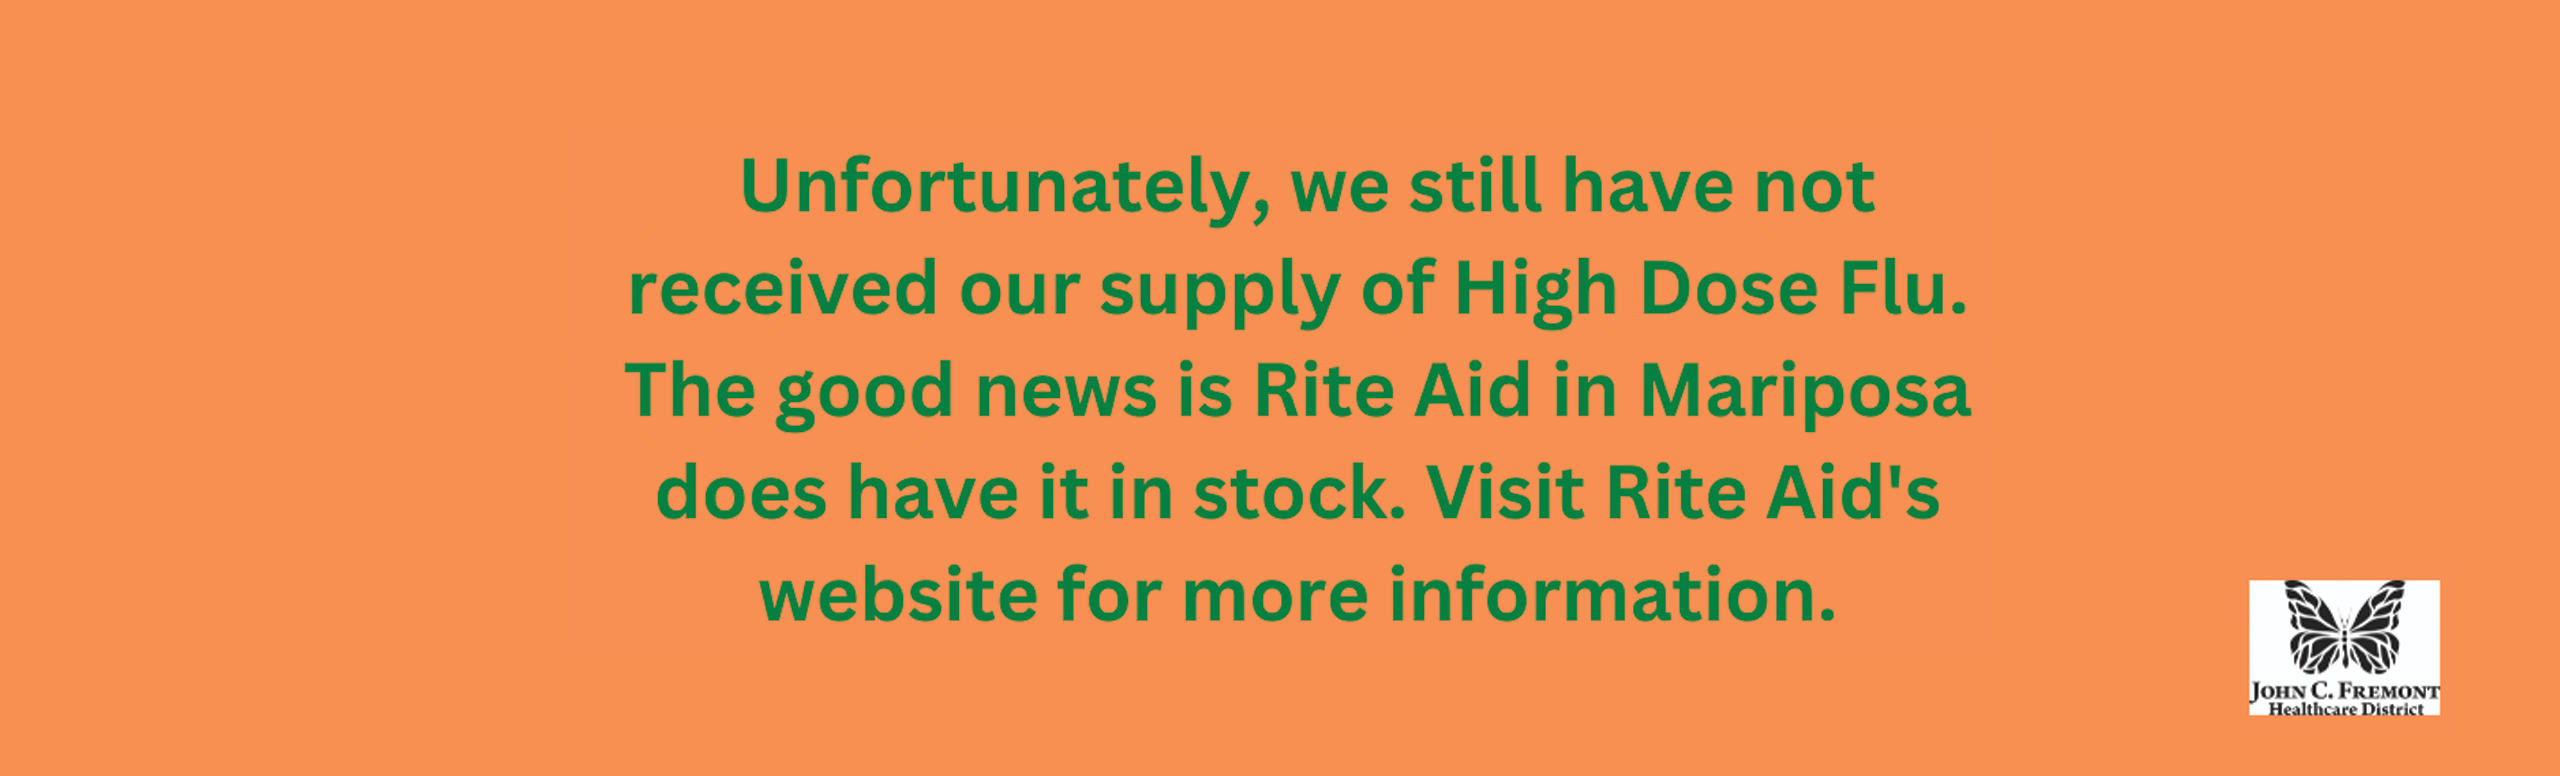 Unfortunately, we still have not received our supply of the High Dose Flu.  The good news is Rite Aid in Mariposa does have it in stock.  Visit Rite Aid's website for more information.